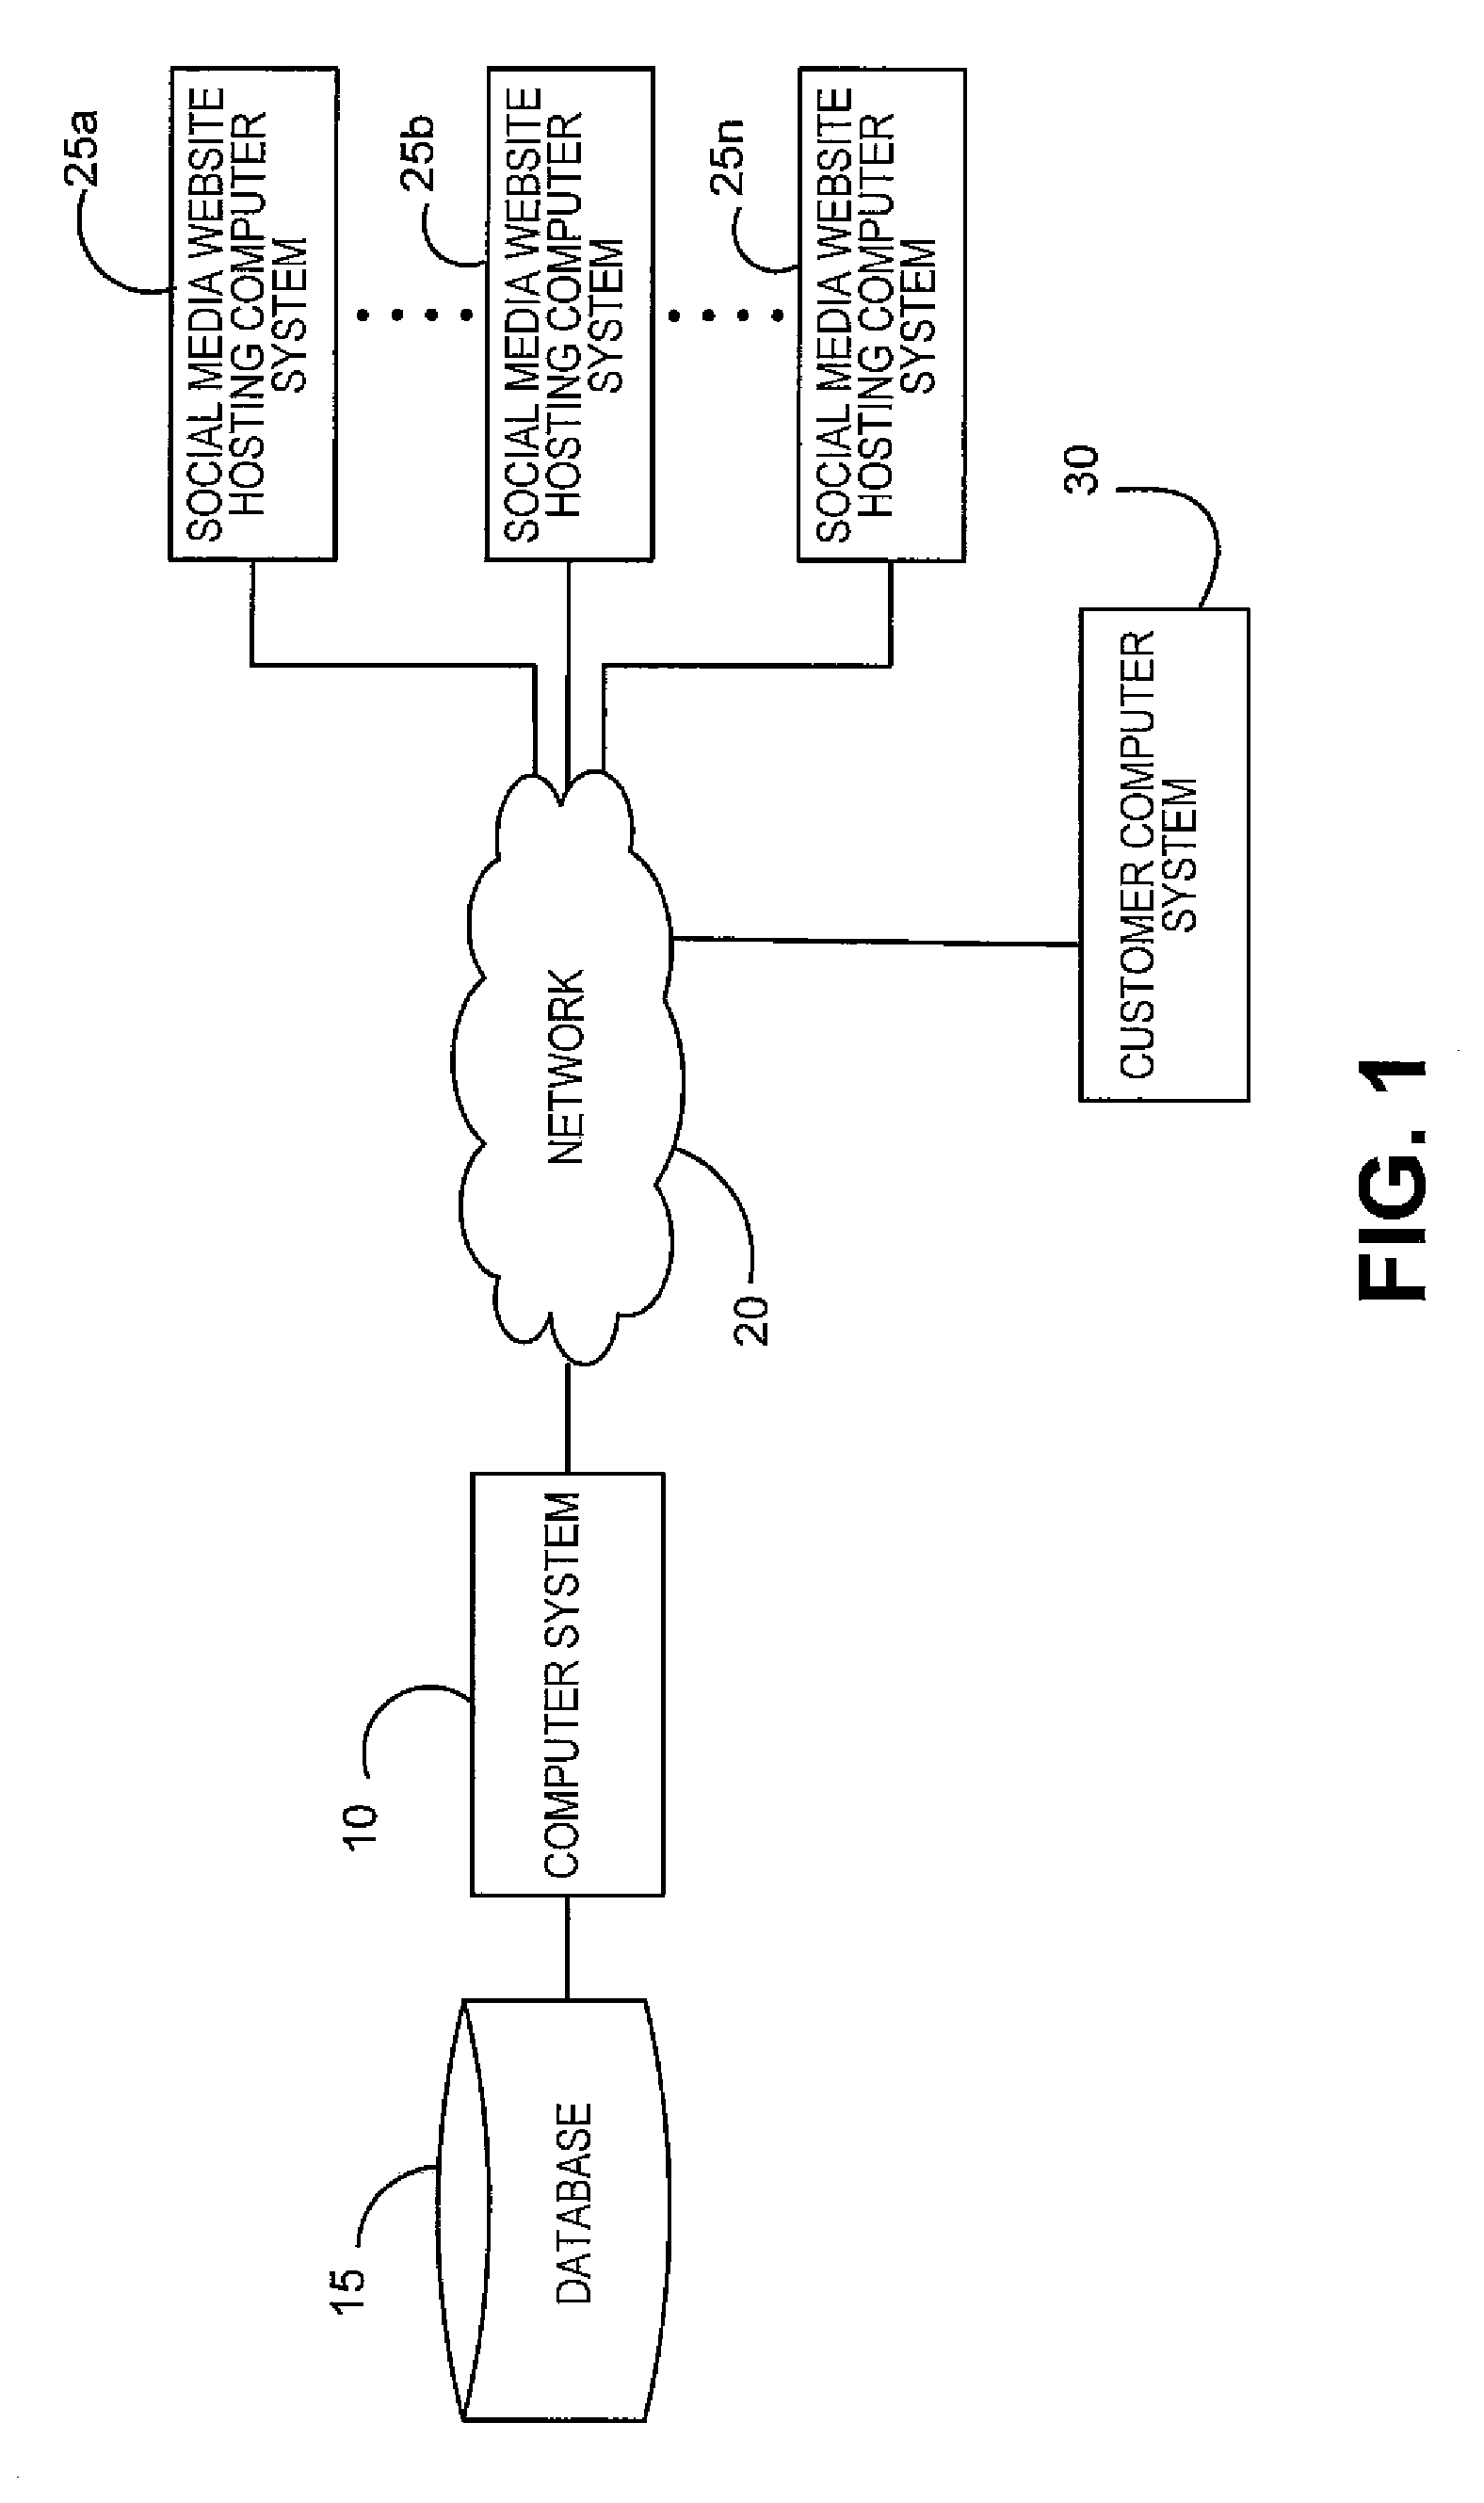 Method and system for creating targeted advertising utilizing social media activity